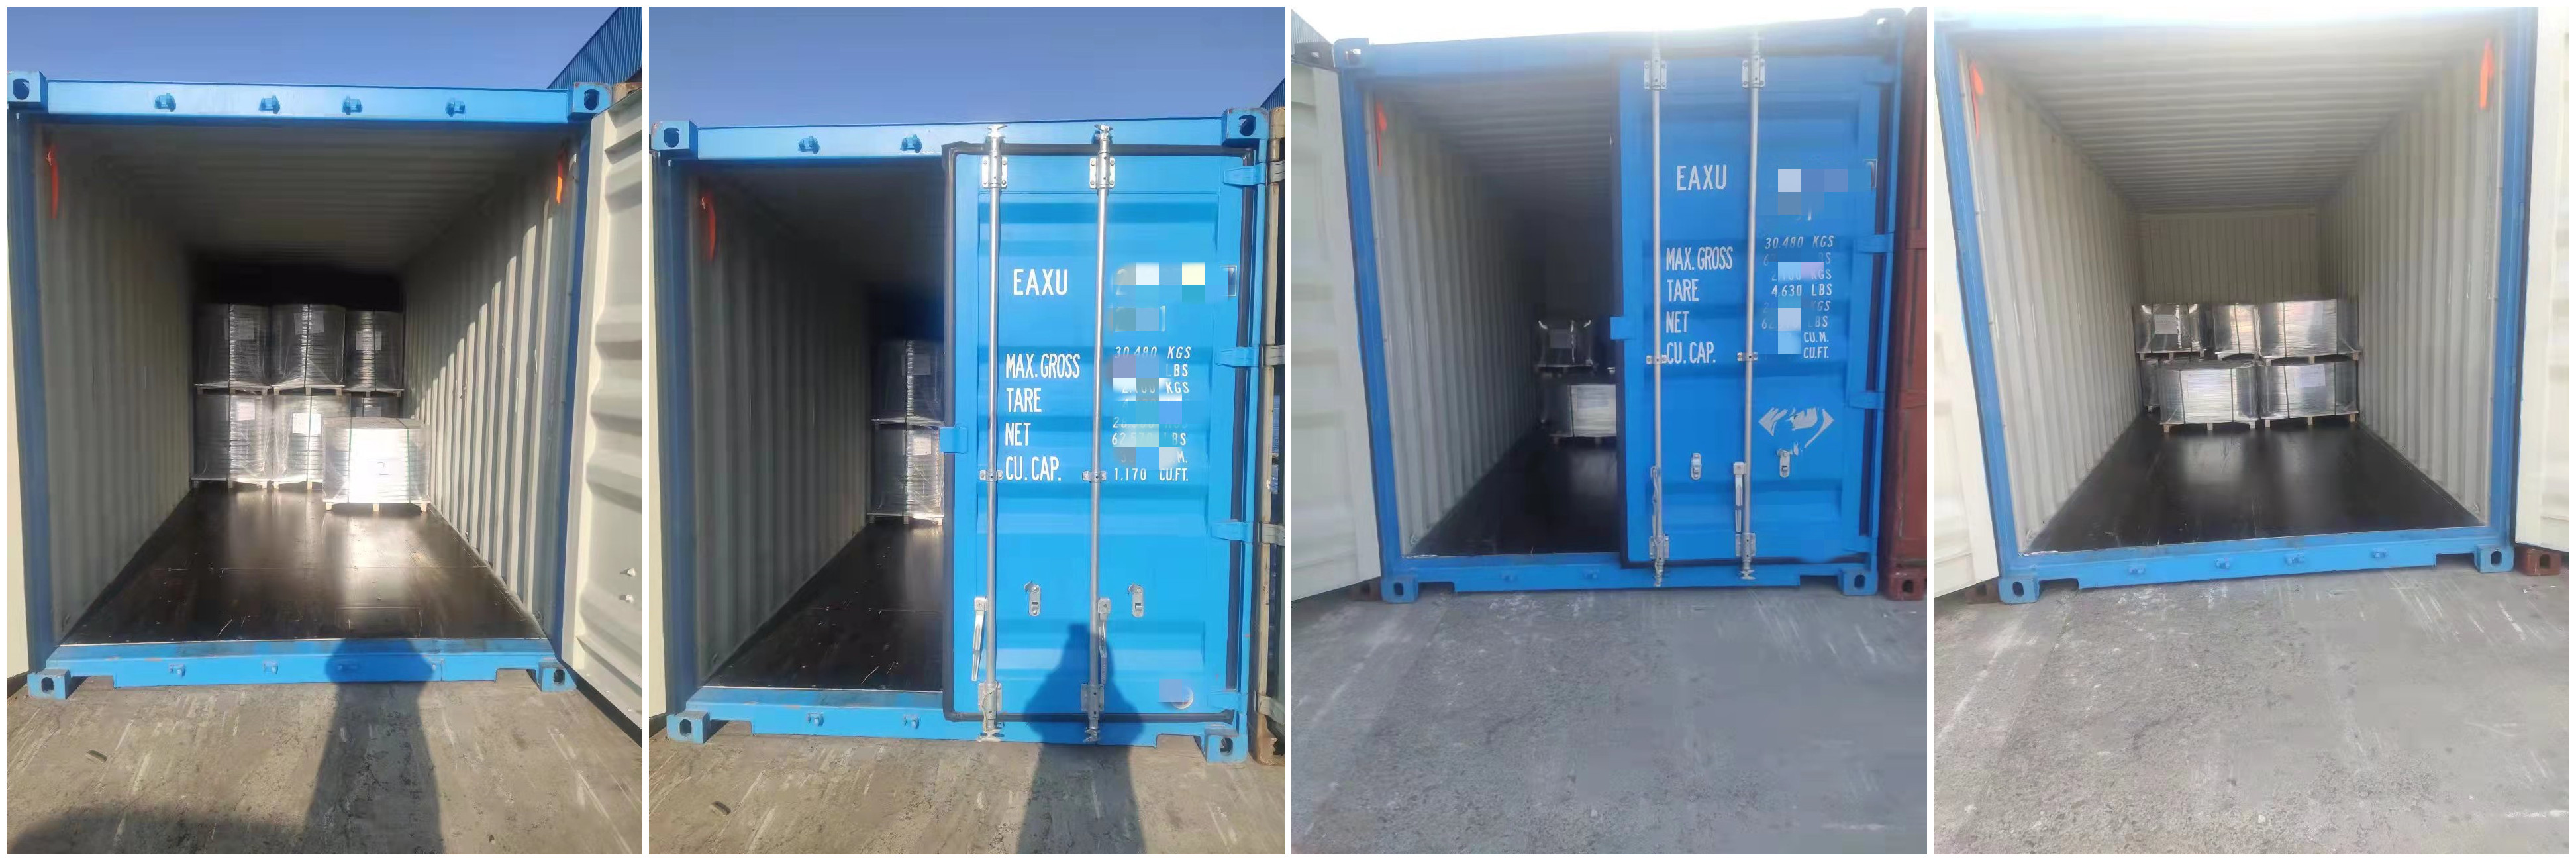 4 containers shipped to the port of Busan, South Korea today! 